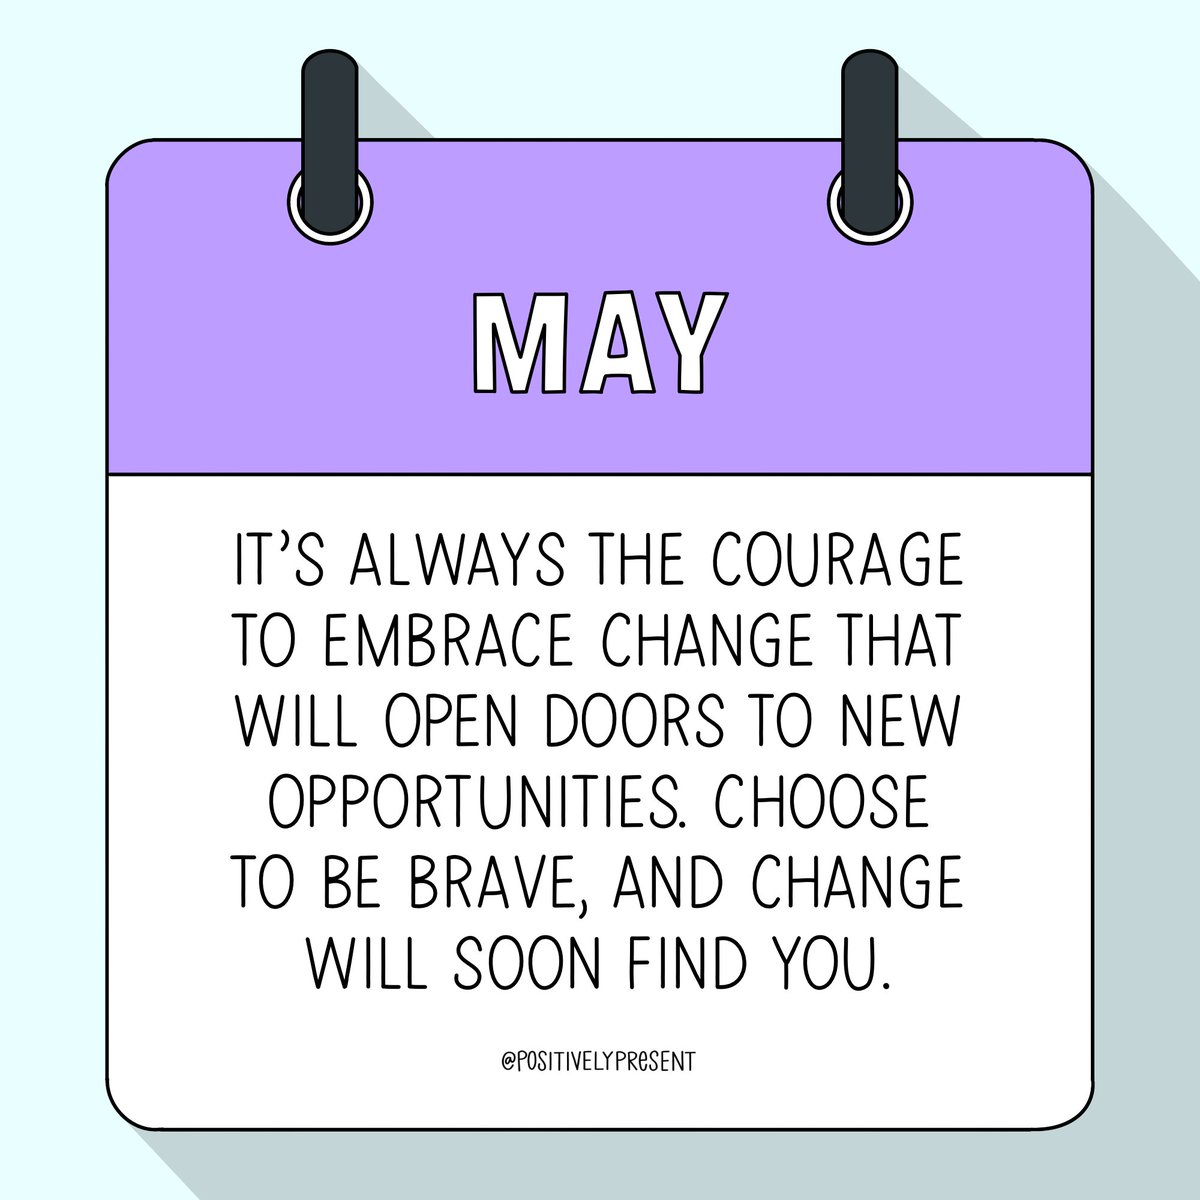 If you want change, you’ve got to be brave! 💜